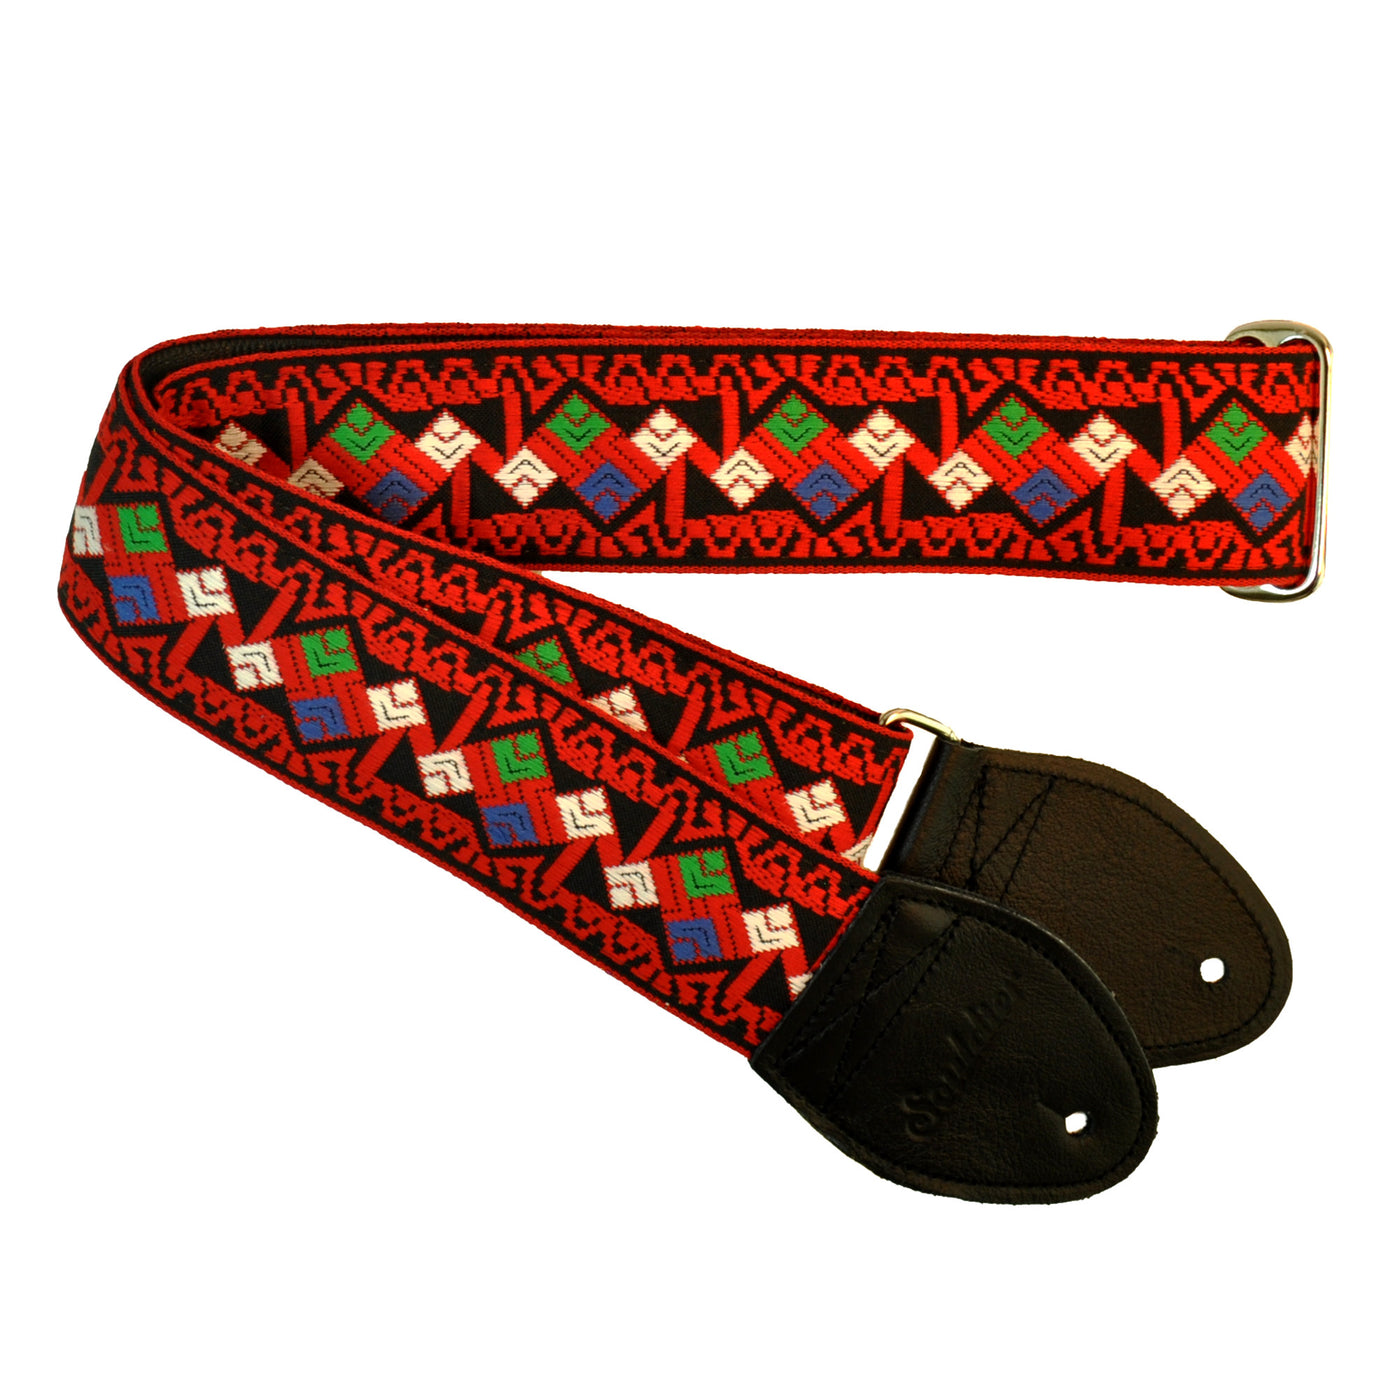 Souldier GS0366BK02BK - Handmade Seatbelt Guitar Strap for Bass, Electric or Acoustic Guitar, 2 Inches Wide and Adjustable Length from 30" to 63"  Made in the USA, Clapton, Red